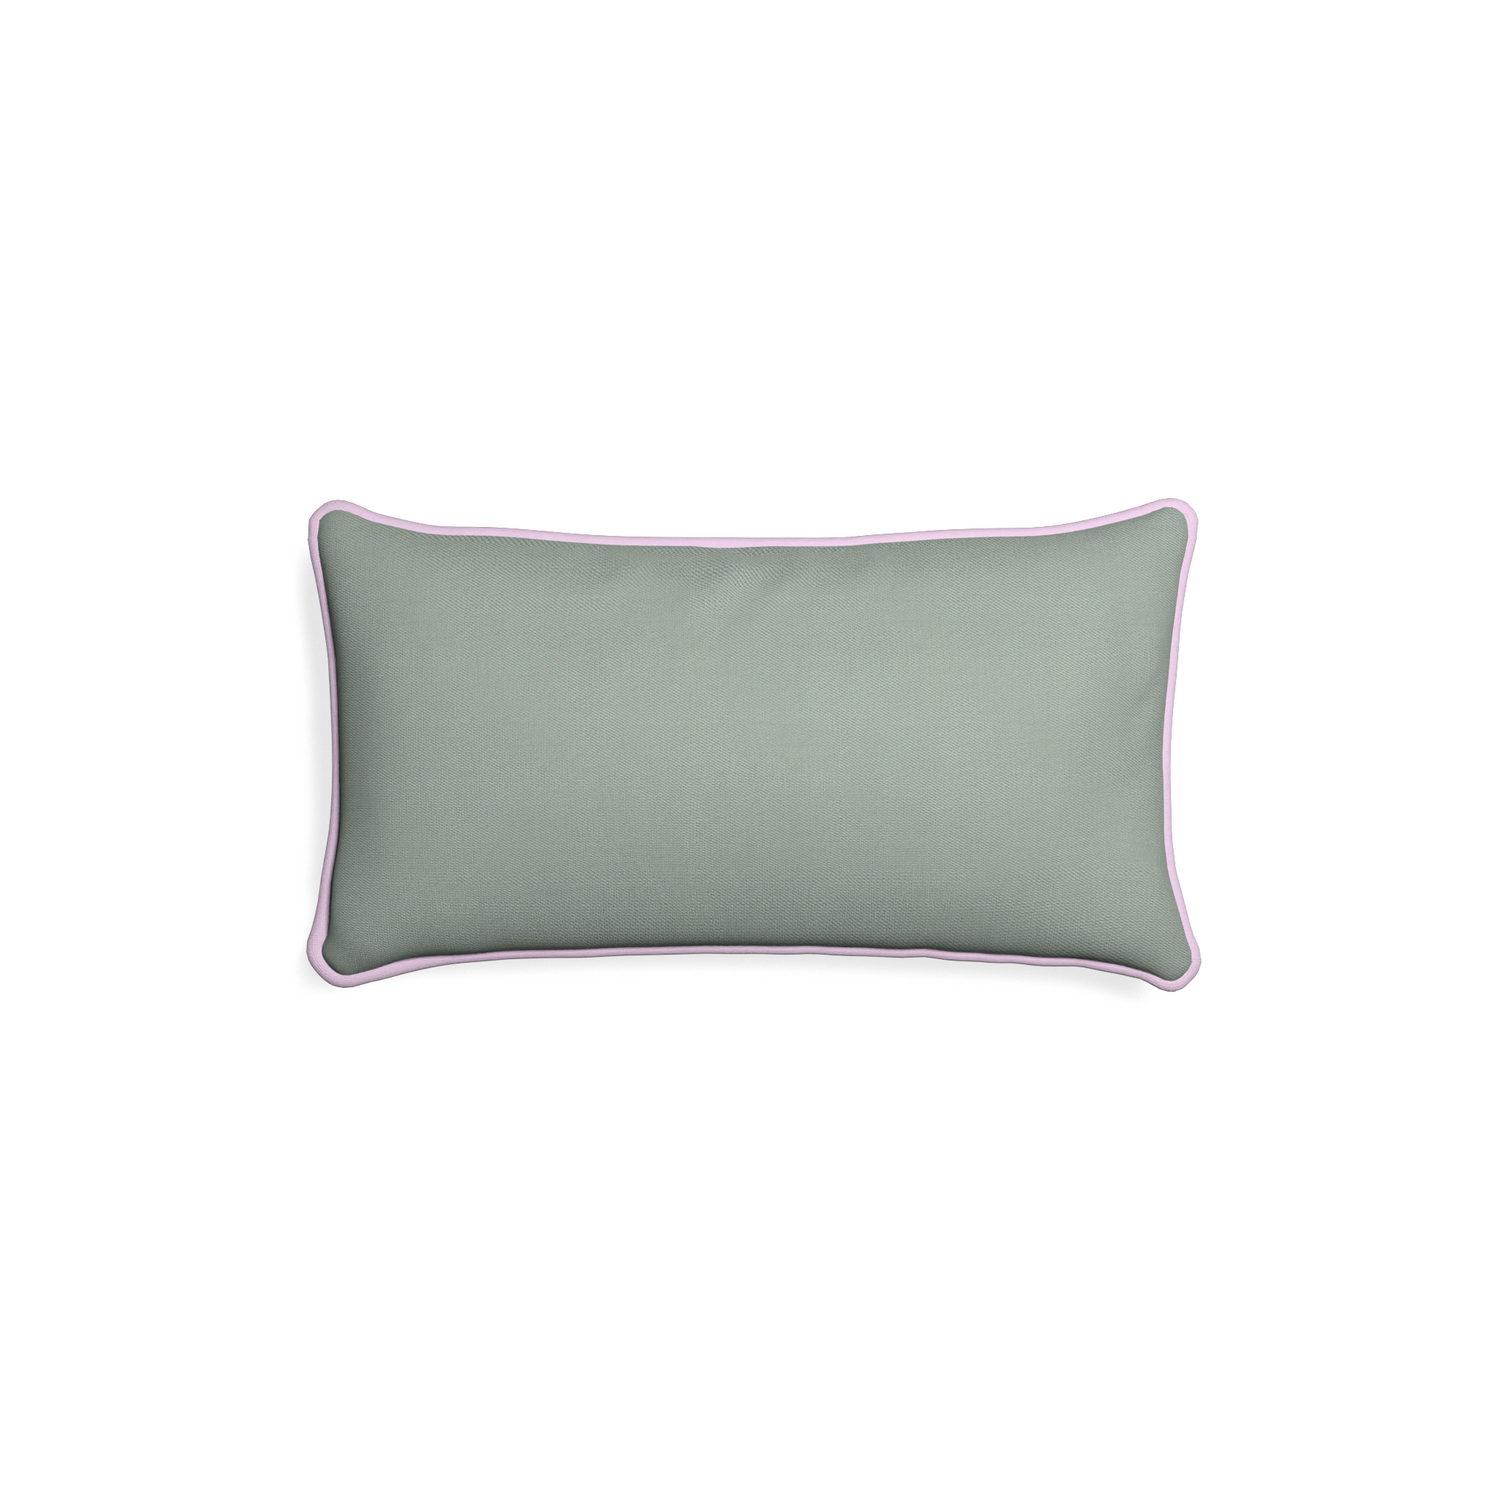 Petite-lumbar sage custom sage green cottonpillow with l piping on white background